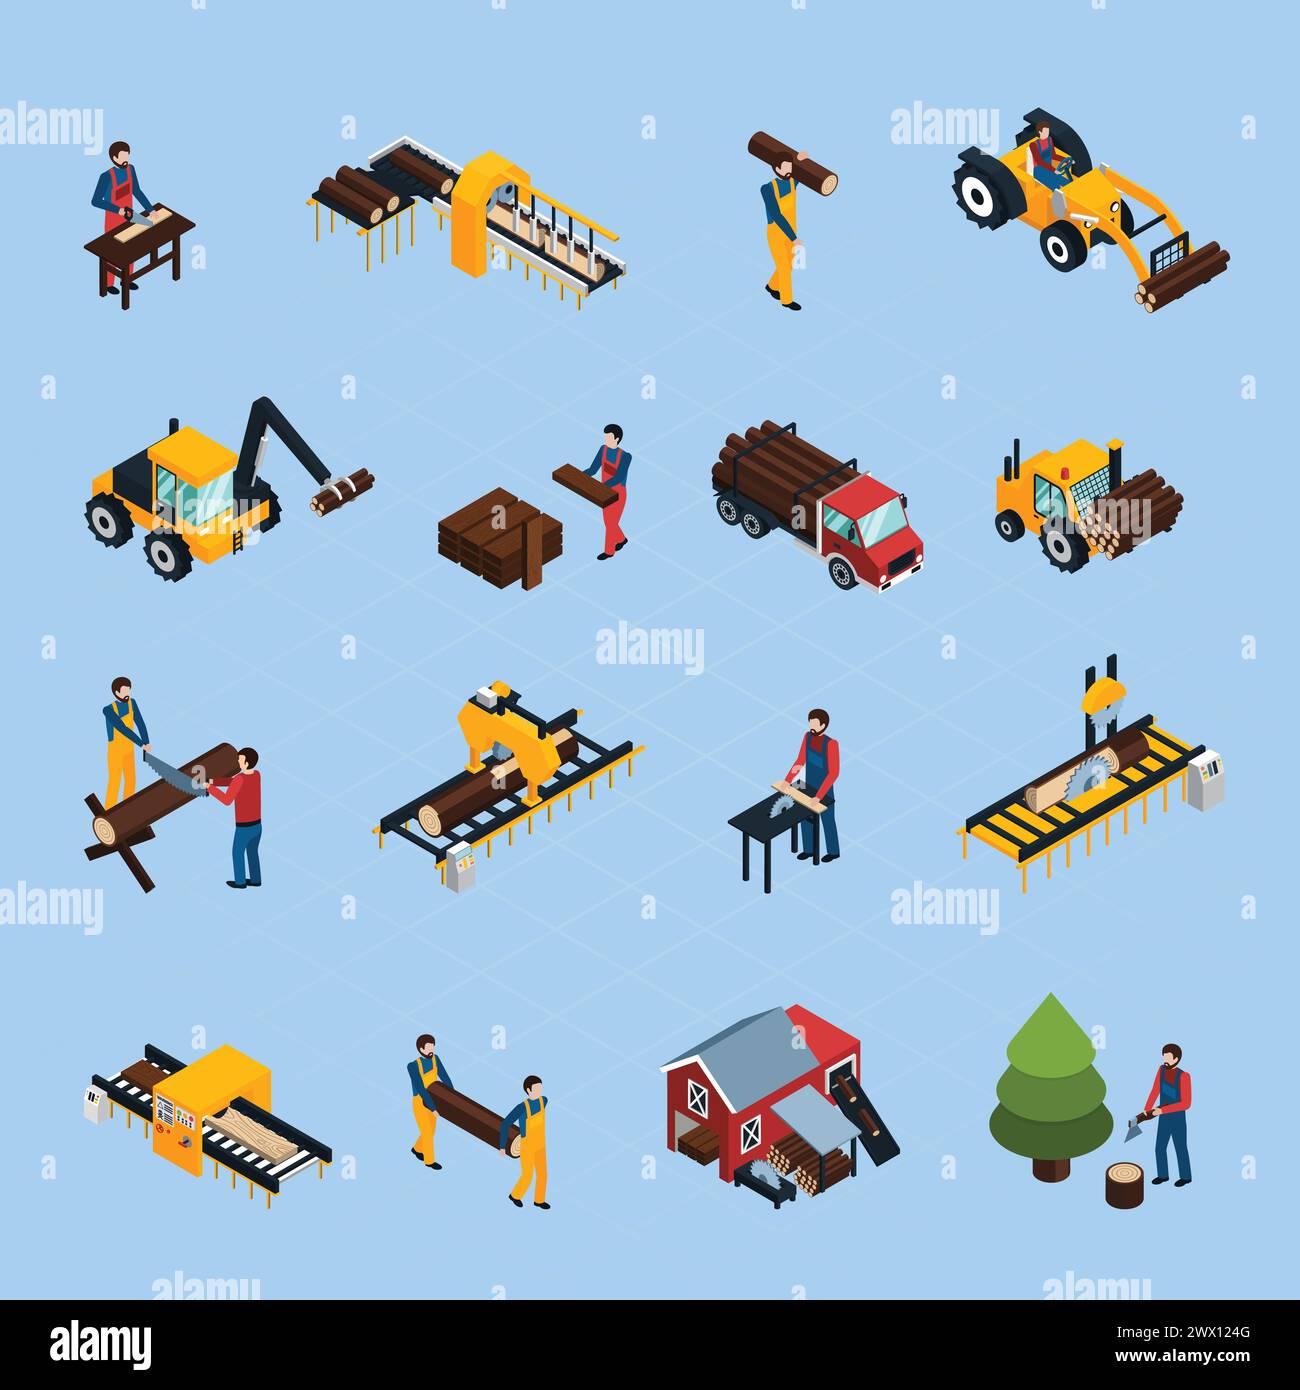 Sawmill isometric icons set of woodworking machinery working loggers and vehicles for timber transportation isolated vector illustration Stock Vector